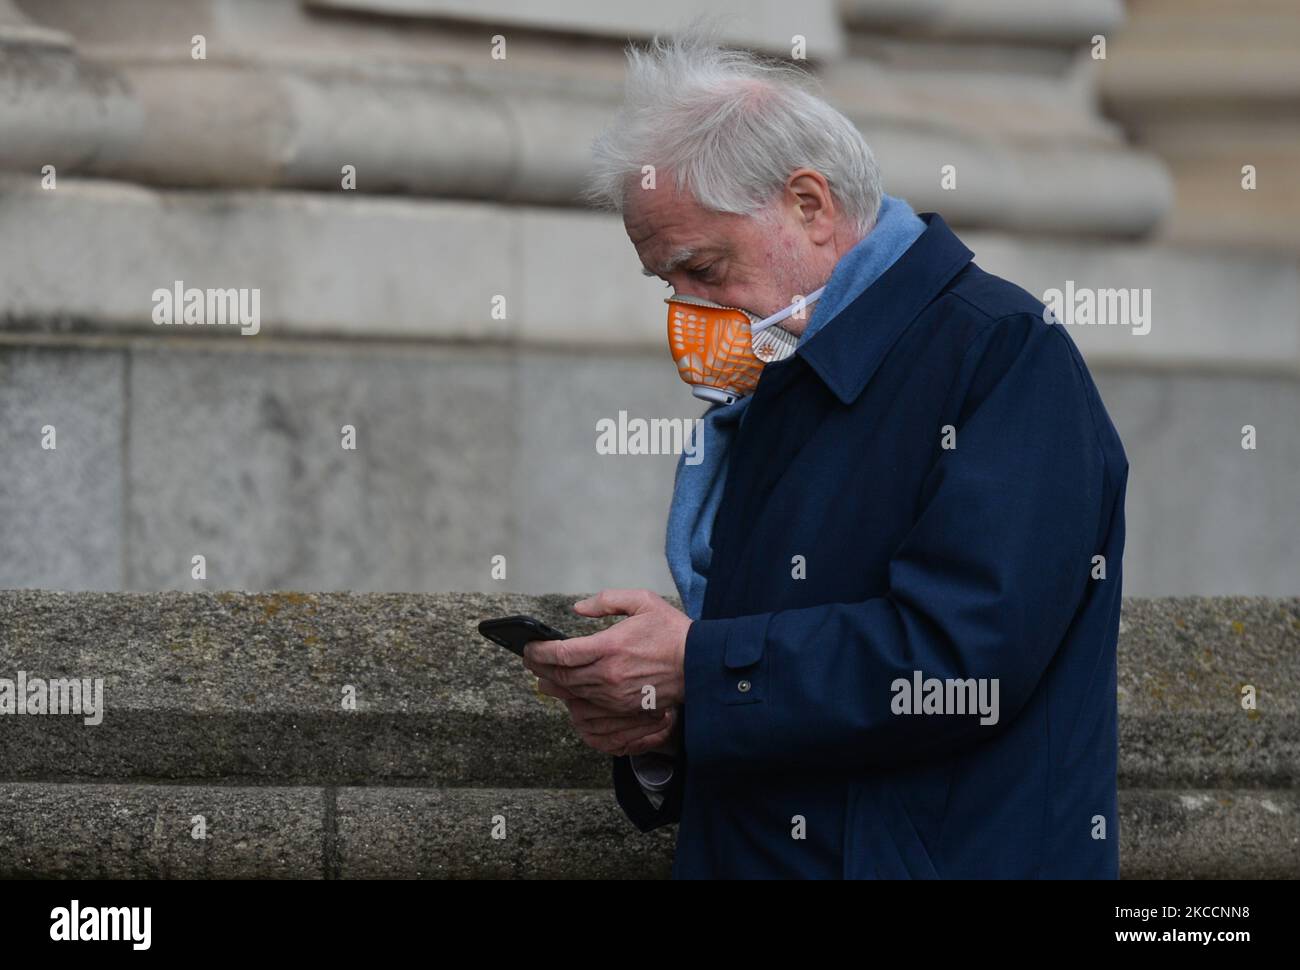 Paul Gallagher, Attorney General of Ireland, pictured at his arrival at Government Buildings in Dublin. On Tuesday, 13 April 2021, in Dublin, Ireland. (Photo by Artur Widak/NurPhoto) Stock Photo